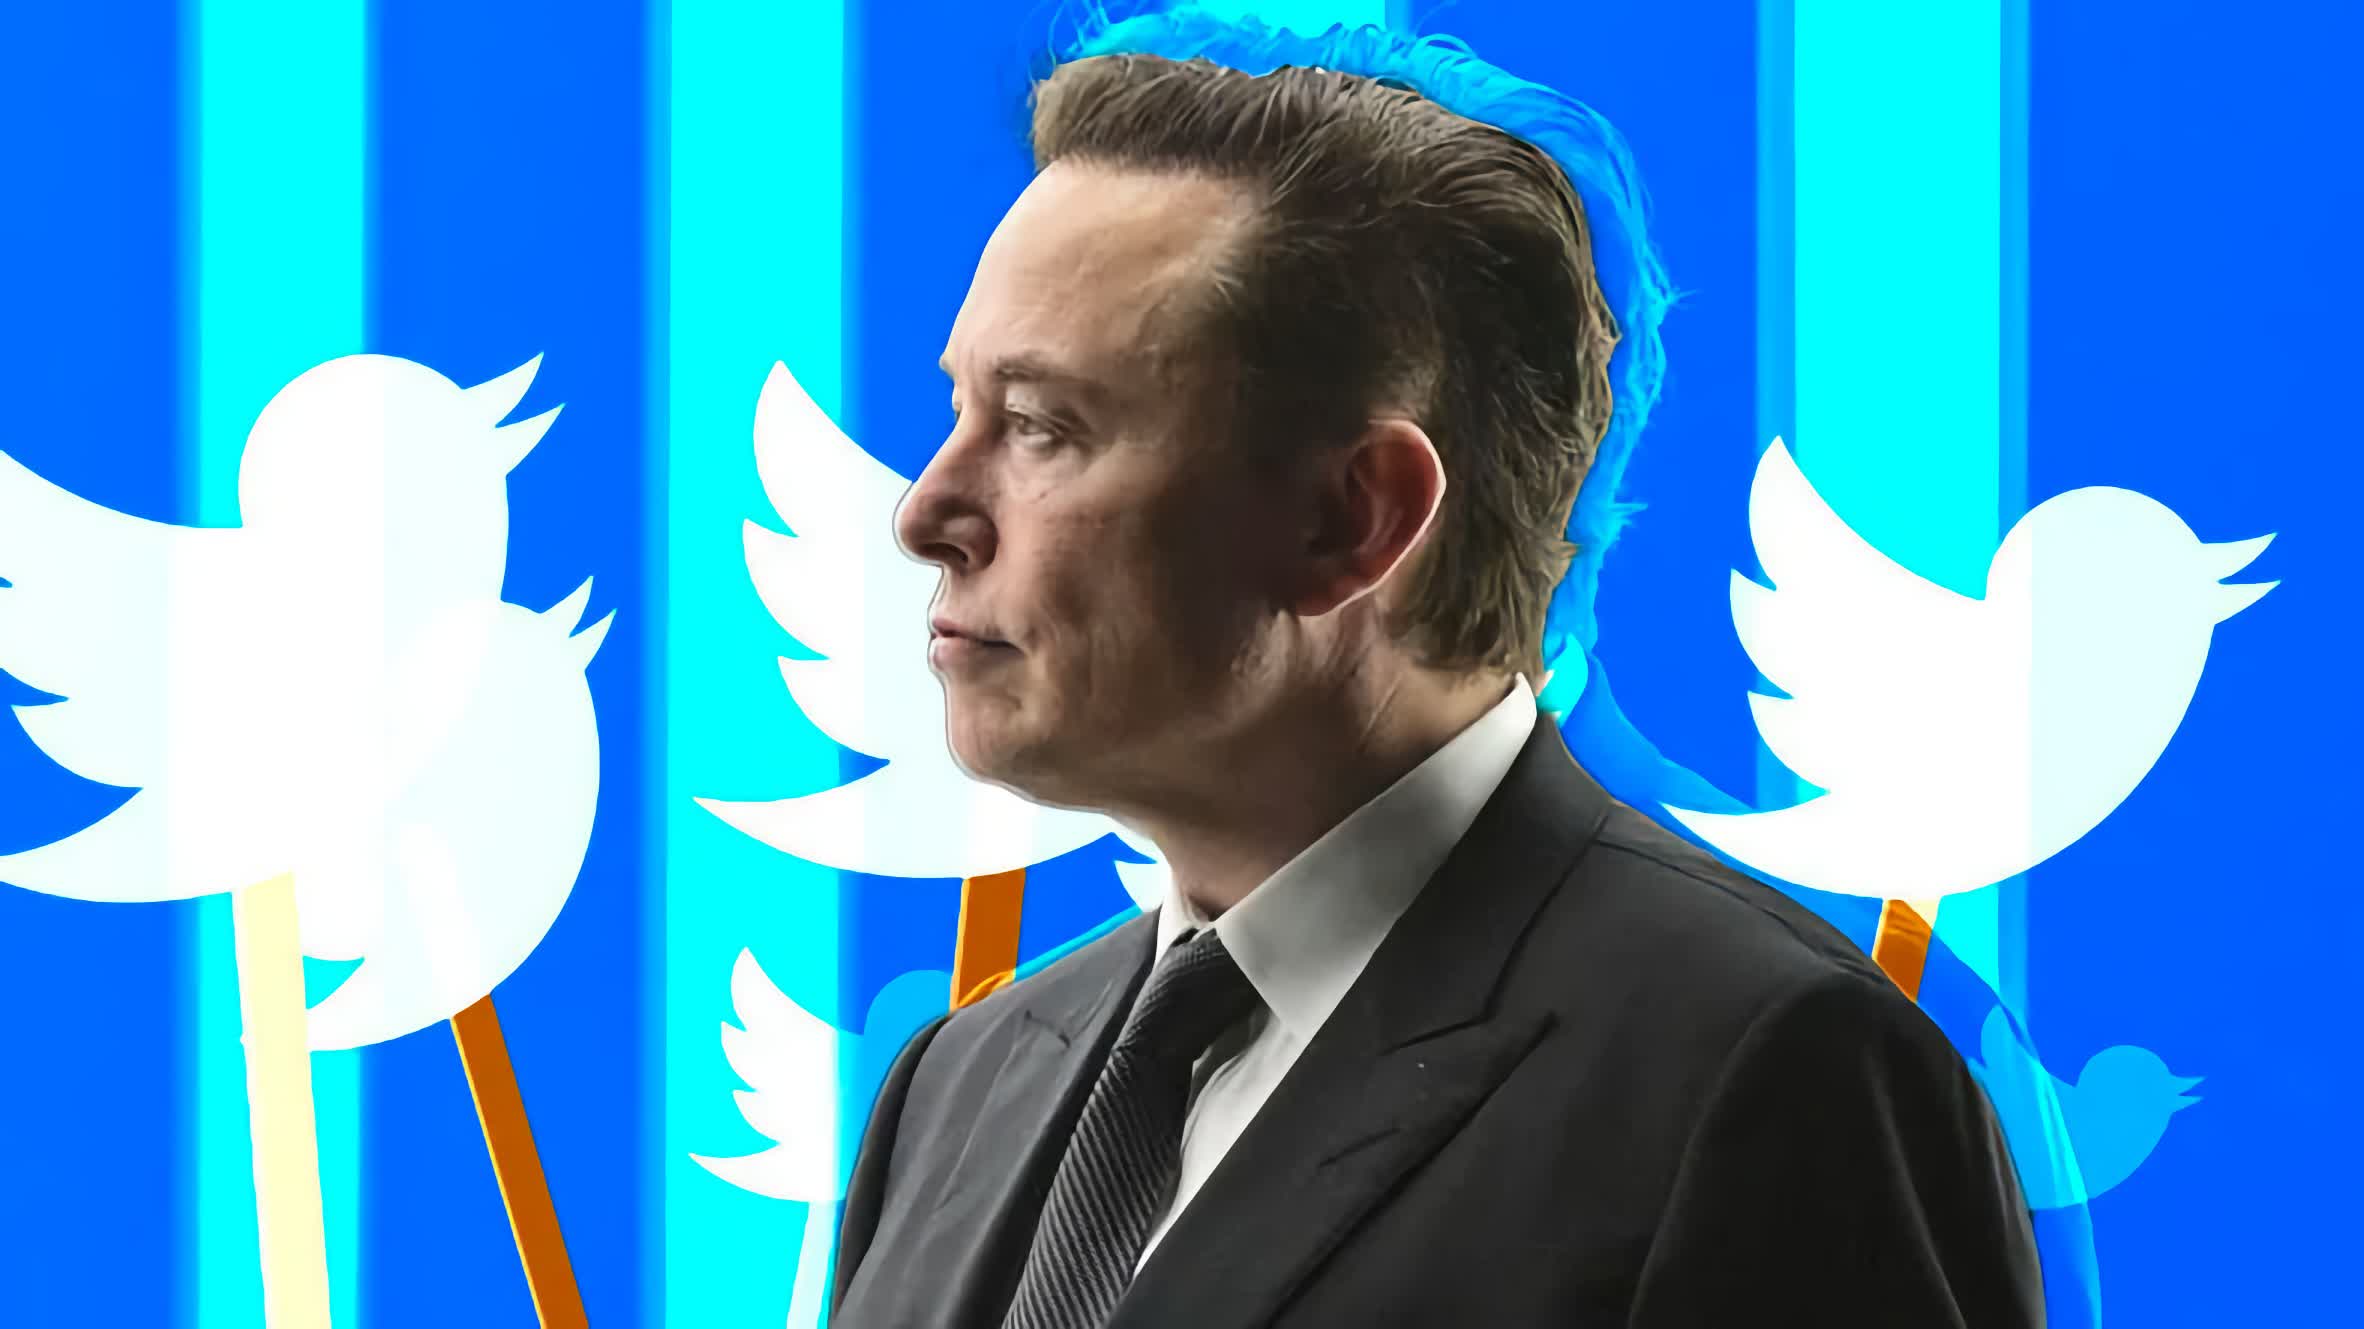 Elon Musk finally takes over Twitter, fires top executives